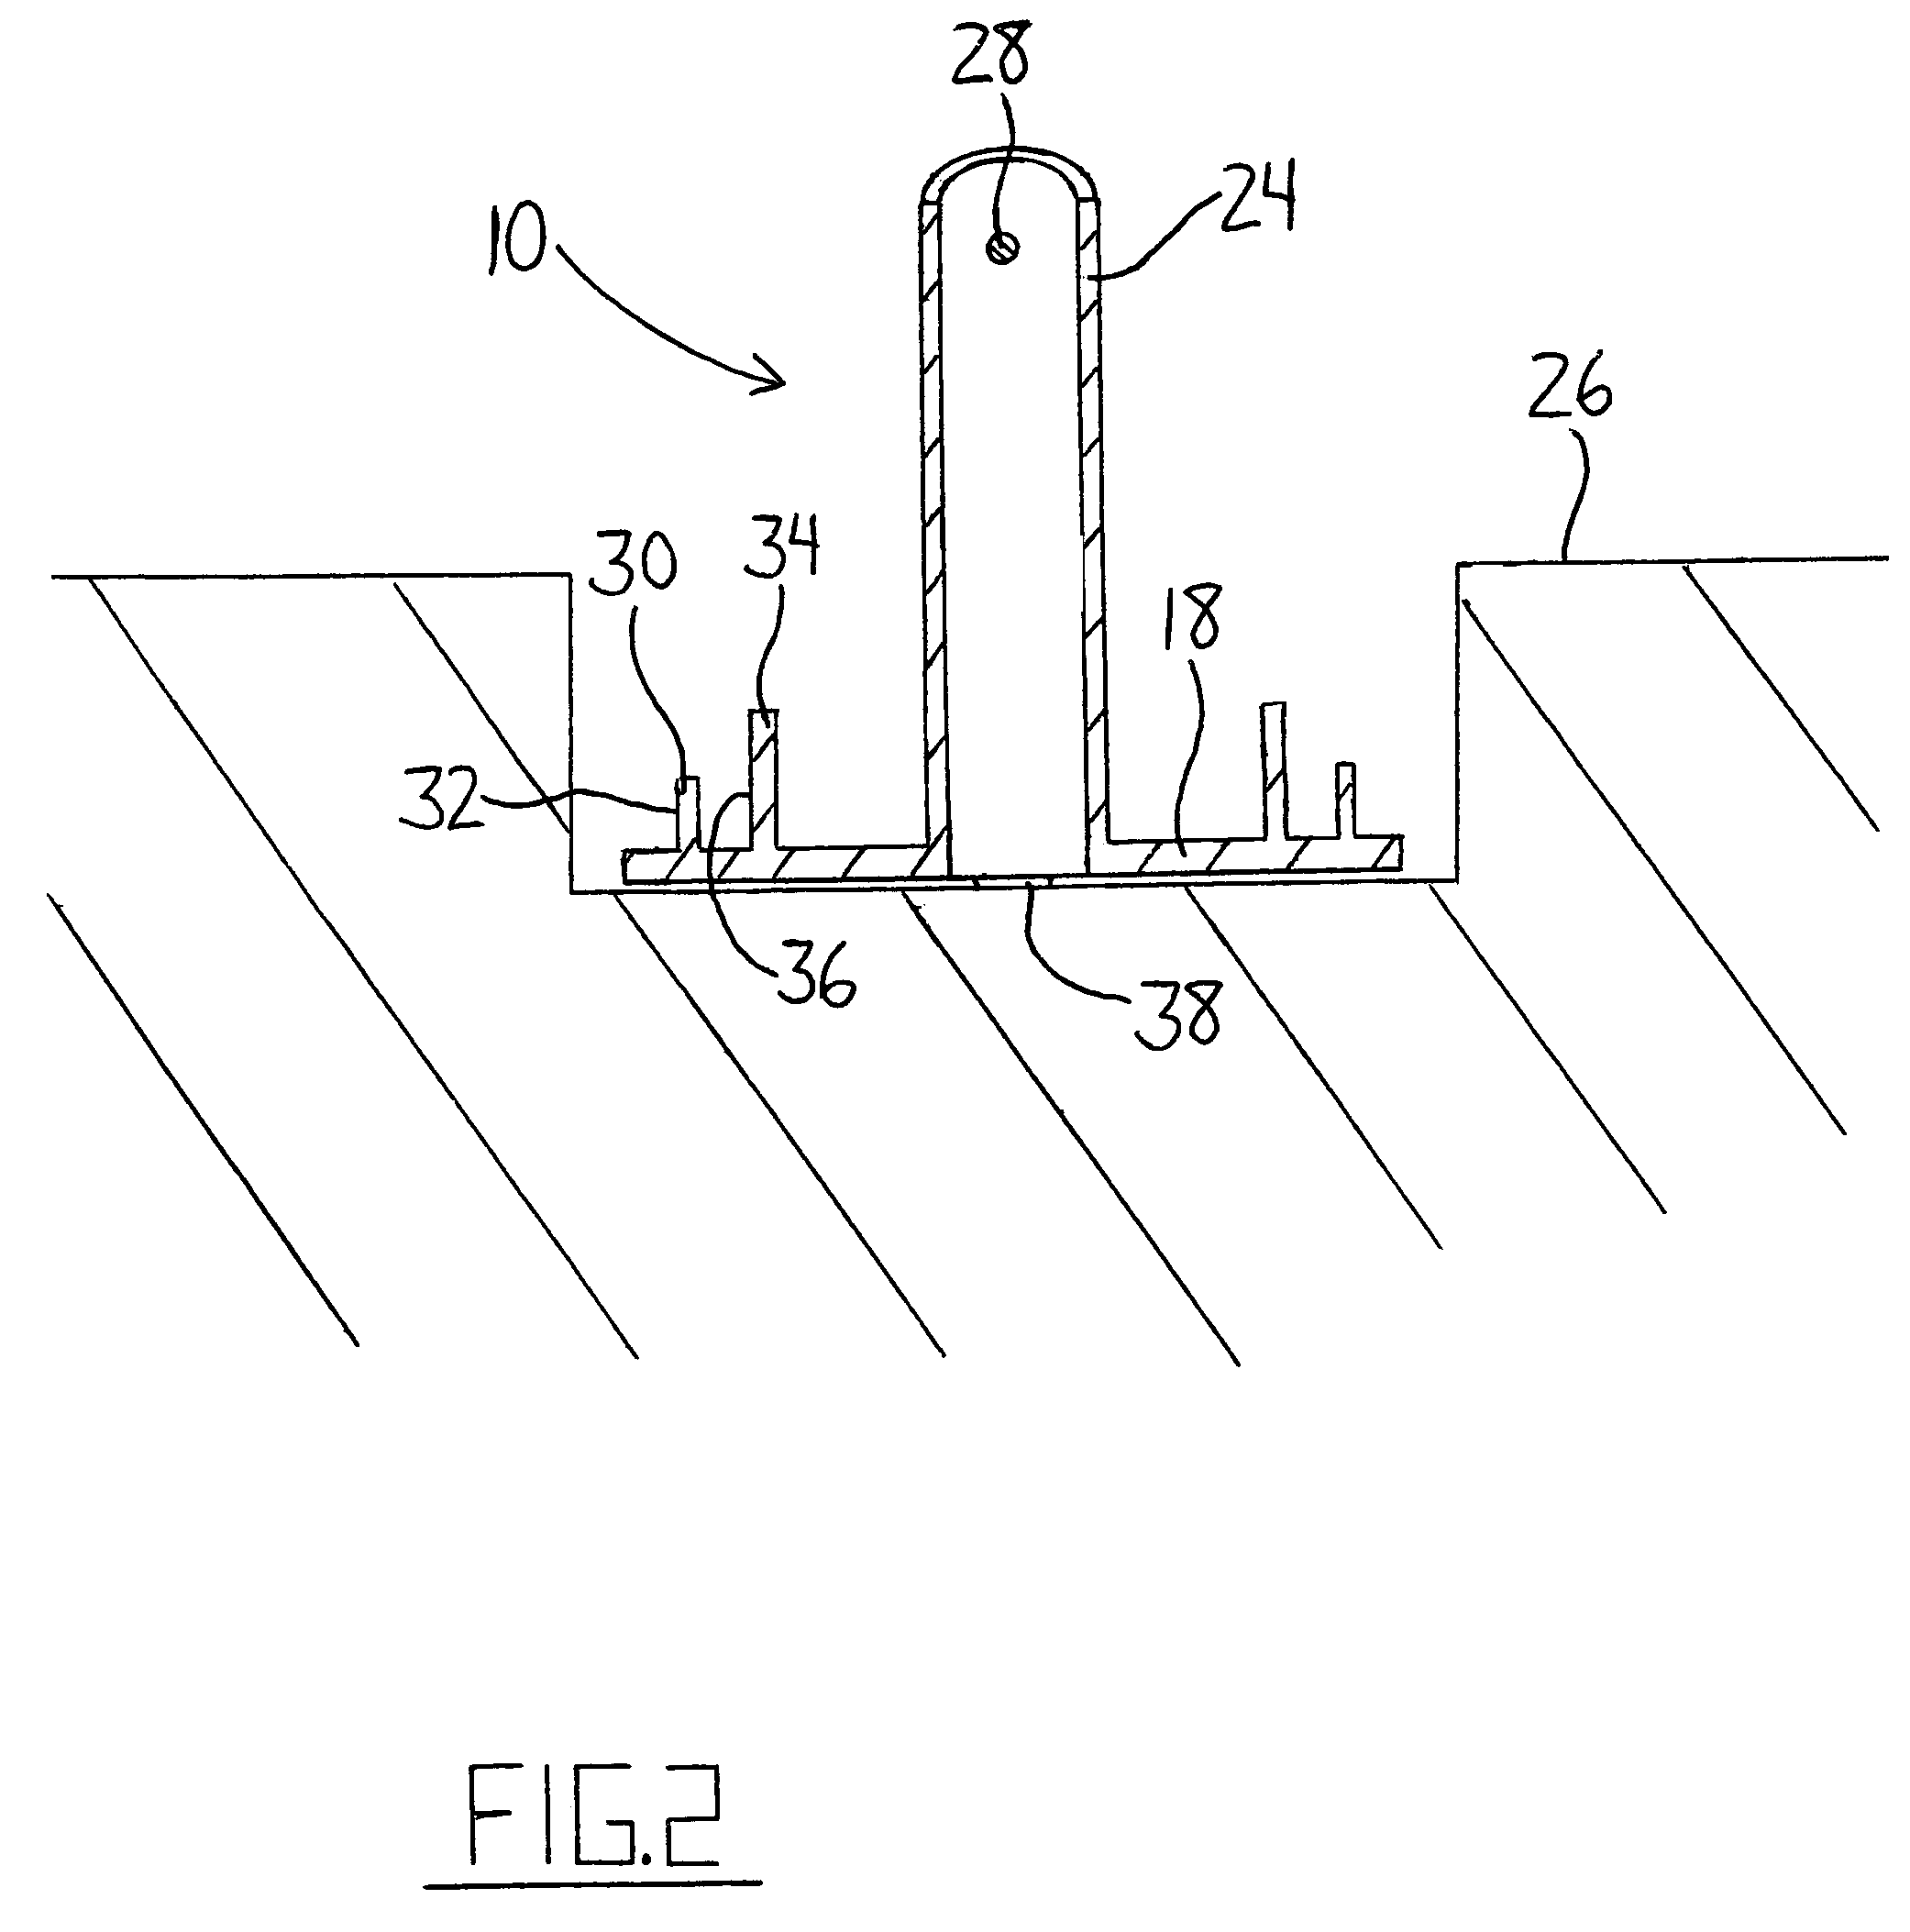 System for mounting a hollow post about a pipe